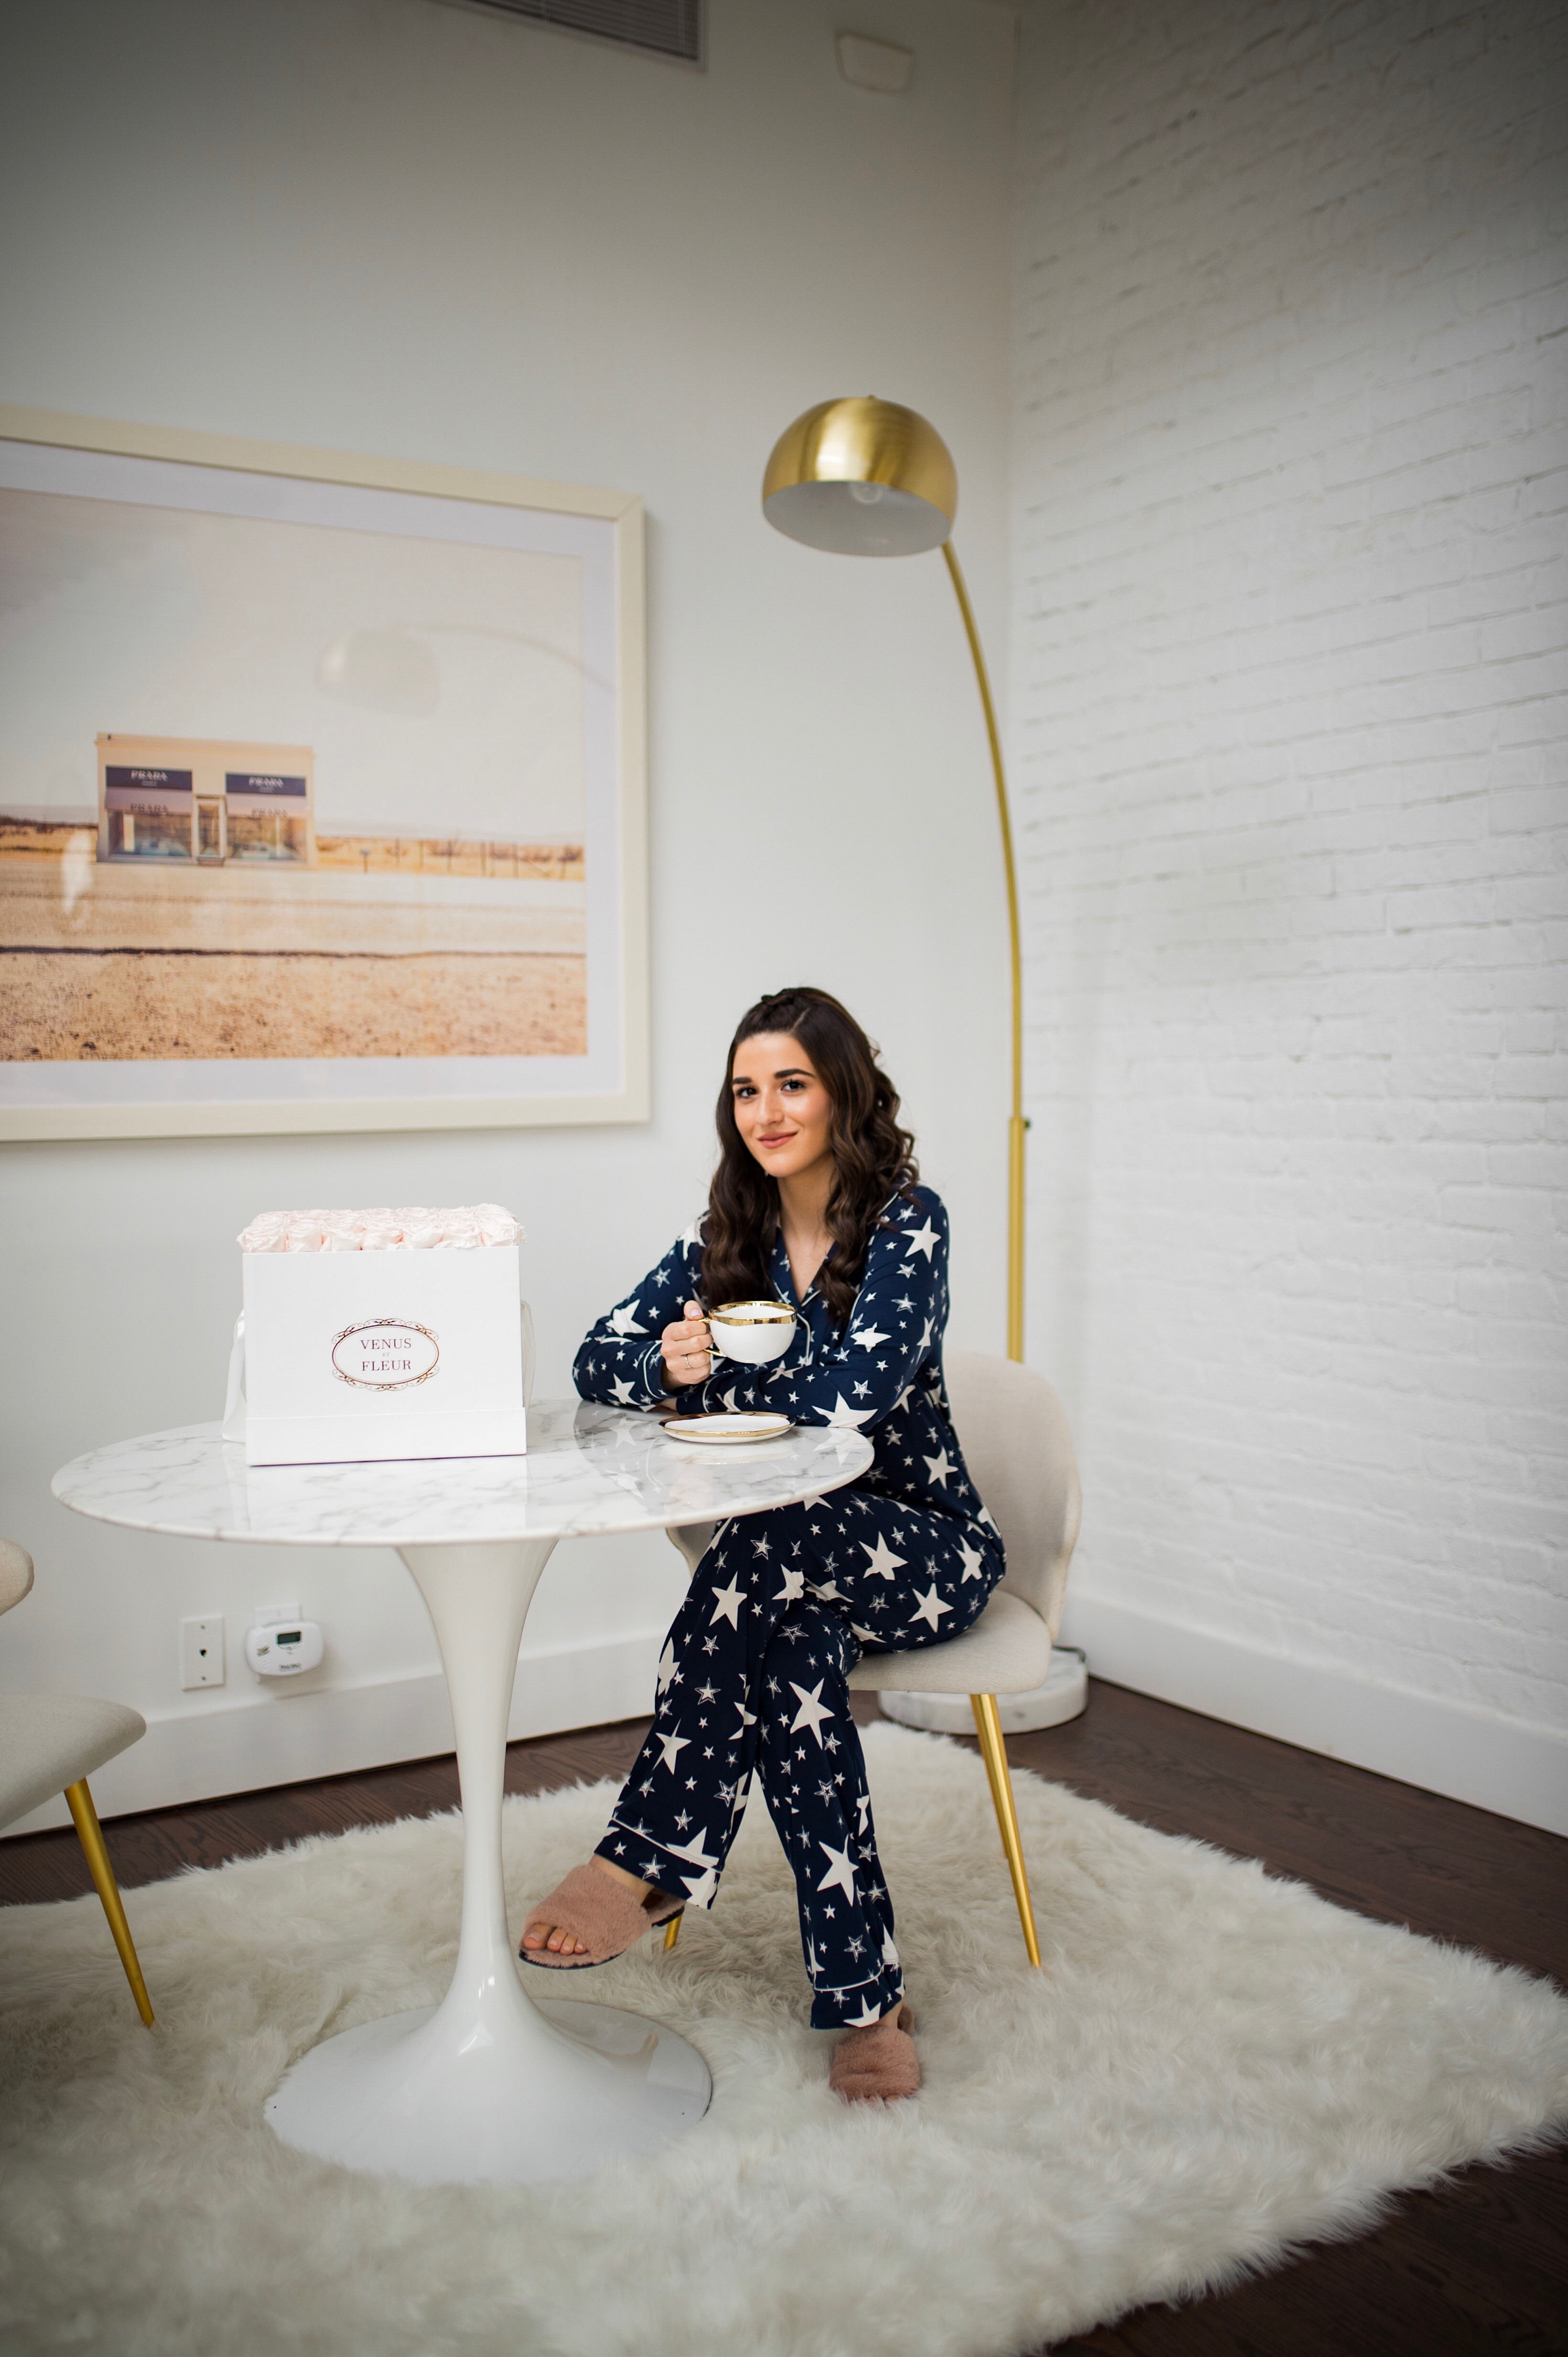 5 Tips For Becoming A Morning Person Navy Star Pajamas Esther Santer Fashion Blog NYC Street Style Blogger Outfit OOTD Trendy Shopping PJs Holiday ASOS Cute Wear Interior Beautiful Home Penthouse Wayfair Circle Mirror Venus Et Fleur Art Marble Table.jpg